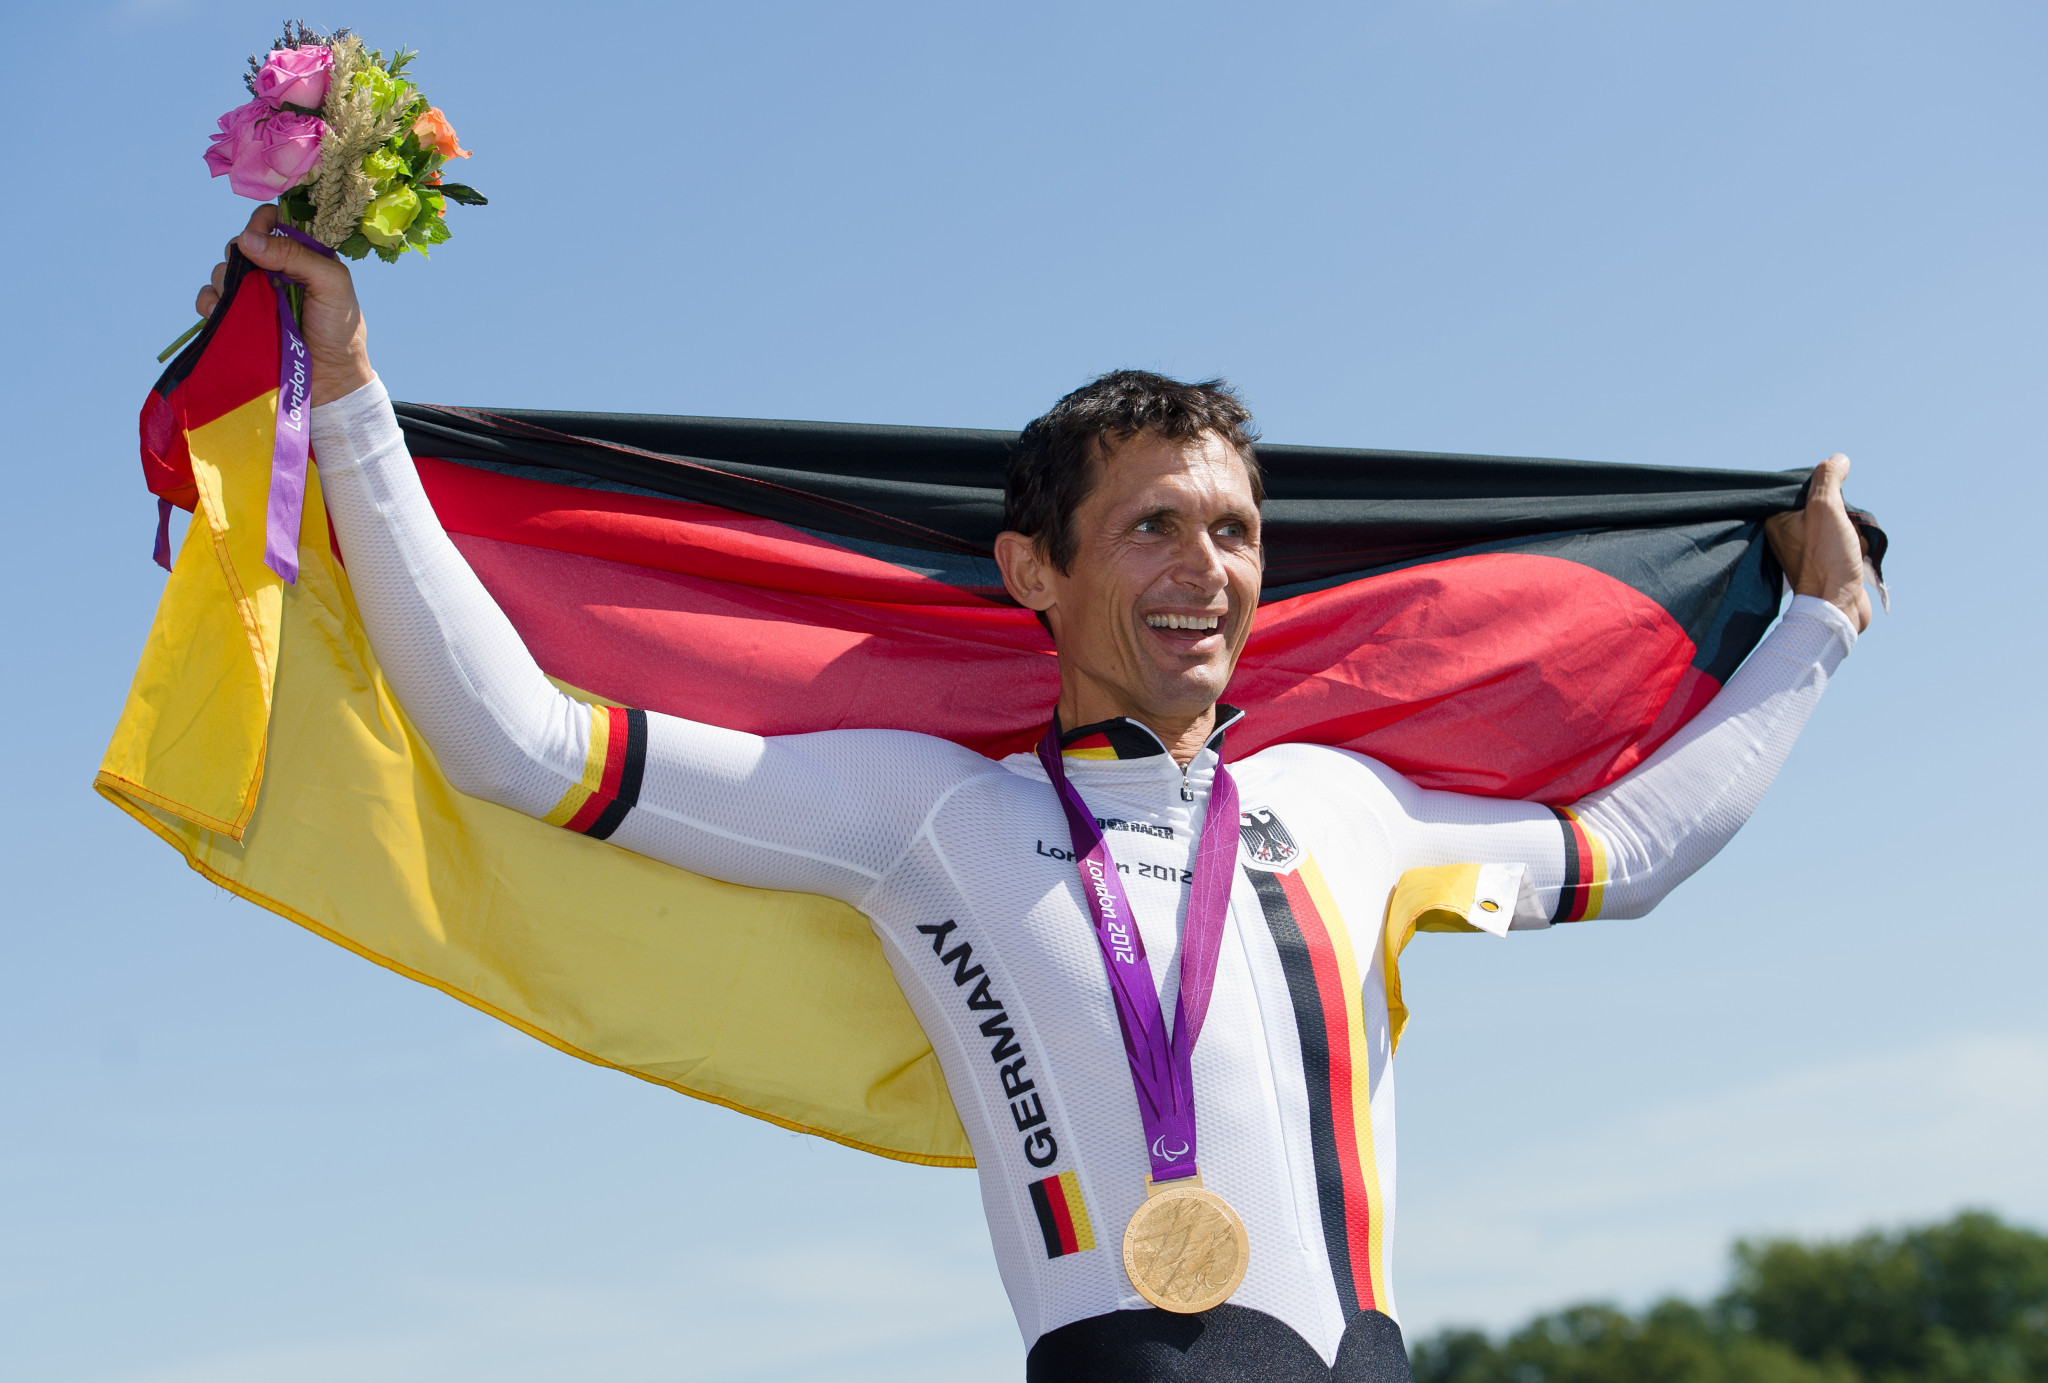 Michael Teuber of Germany clinched the men’s C1 time trial gold in Baie-Comeau ©Getty Images